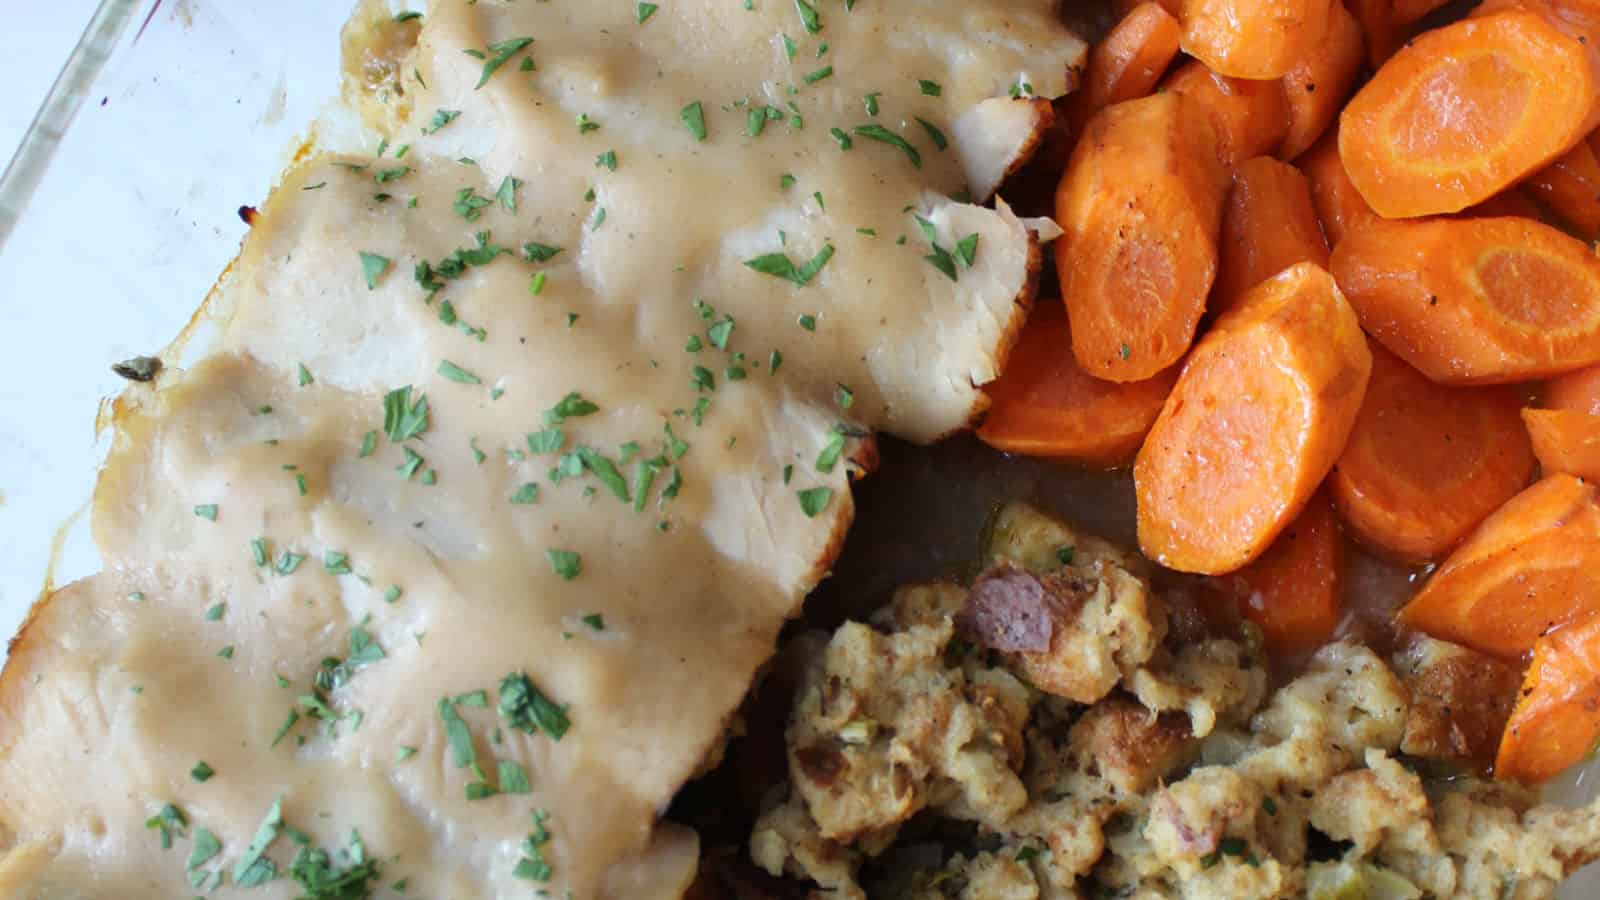 Turkey rolls with stuffing and cooked carrots.